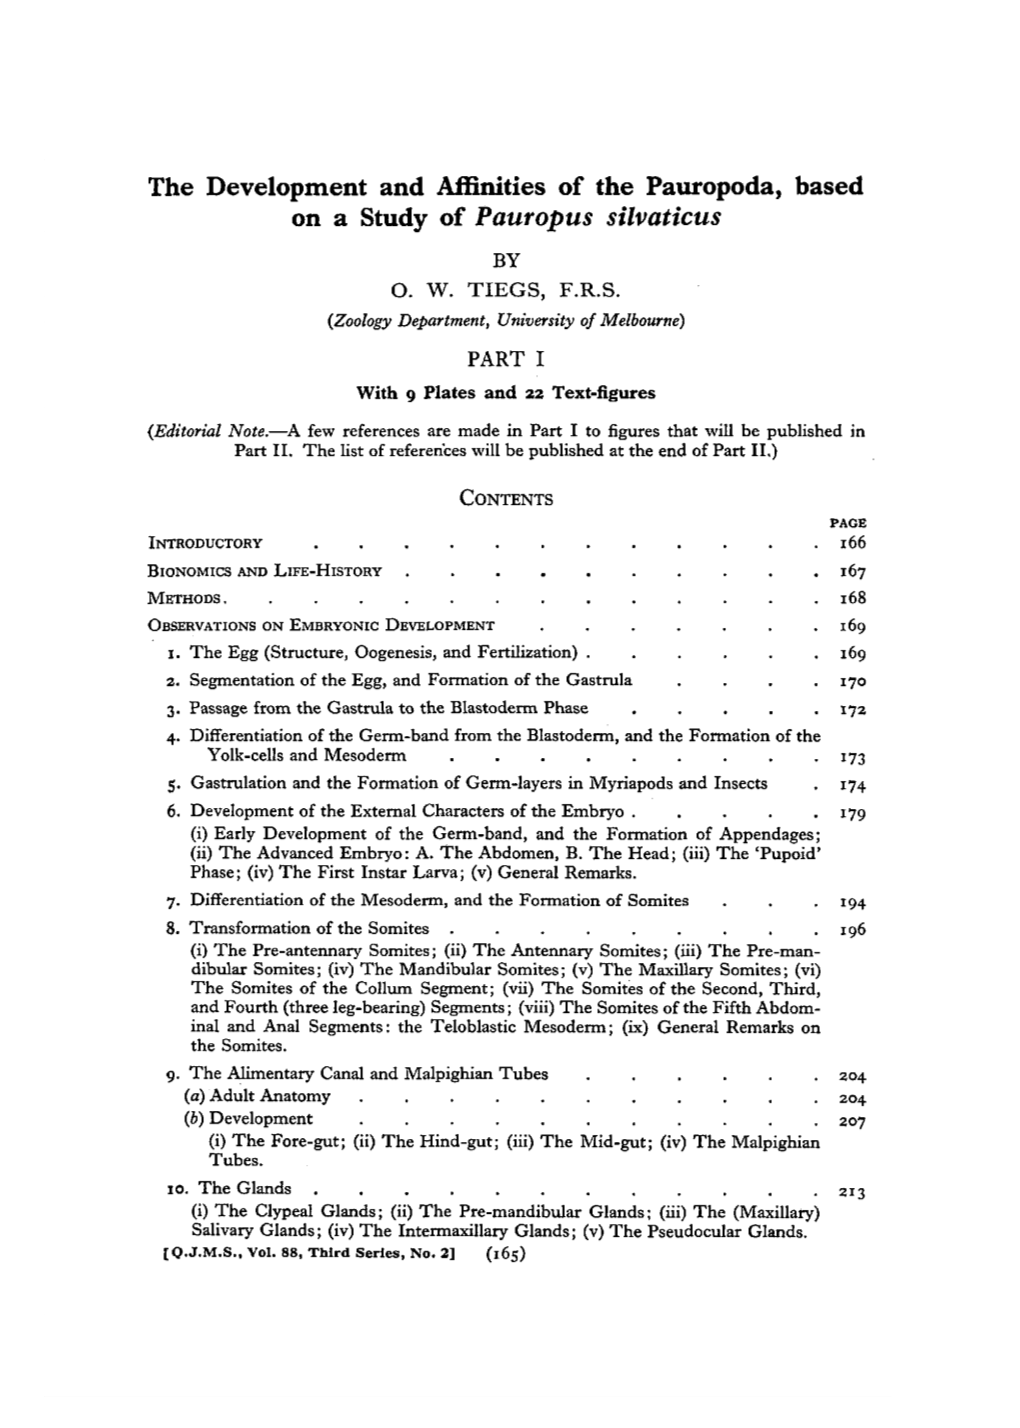 The Development and Affinities of the Pauropoda, Based on a Study of Pauropus Silvaticus by O